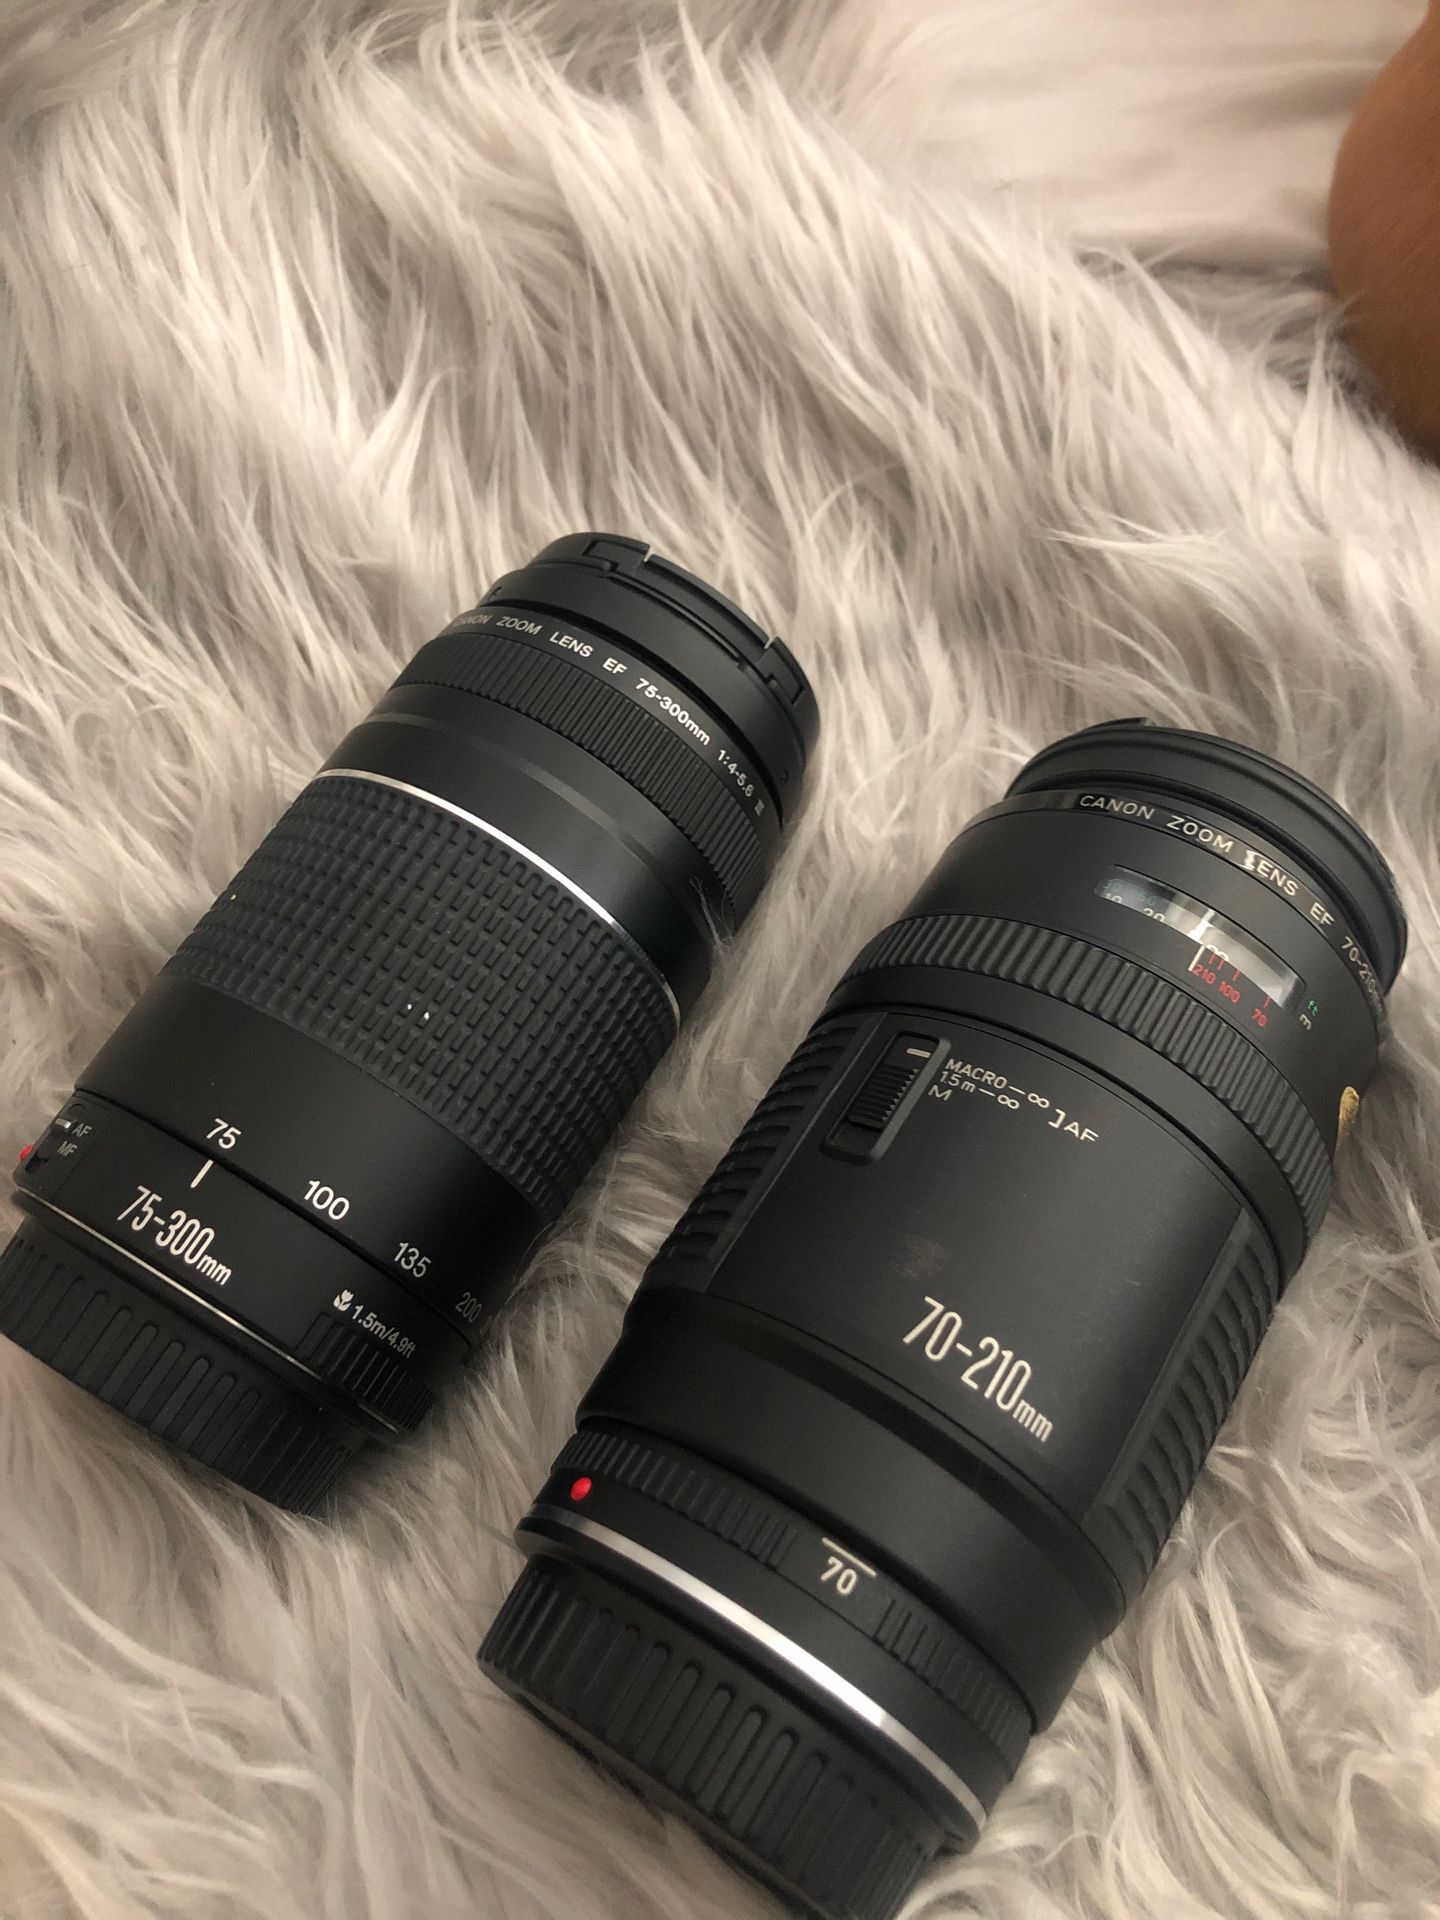 Two Canon lenses 75-300 mm 1:4-5:6 & 70-210 mm 1:4 professional lenses. Great condition! Very well taken care of.